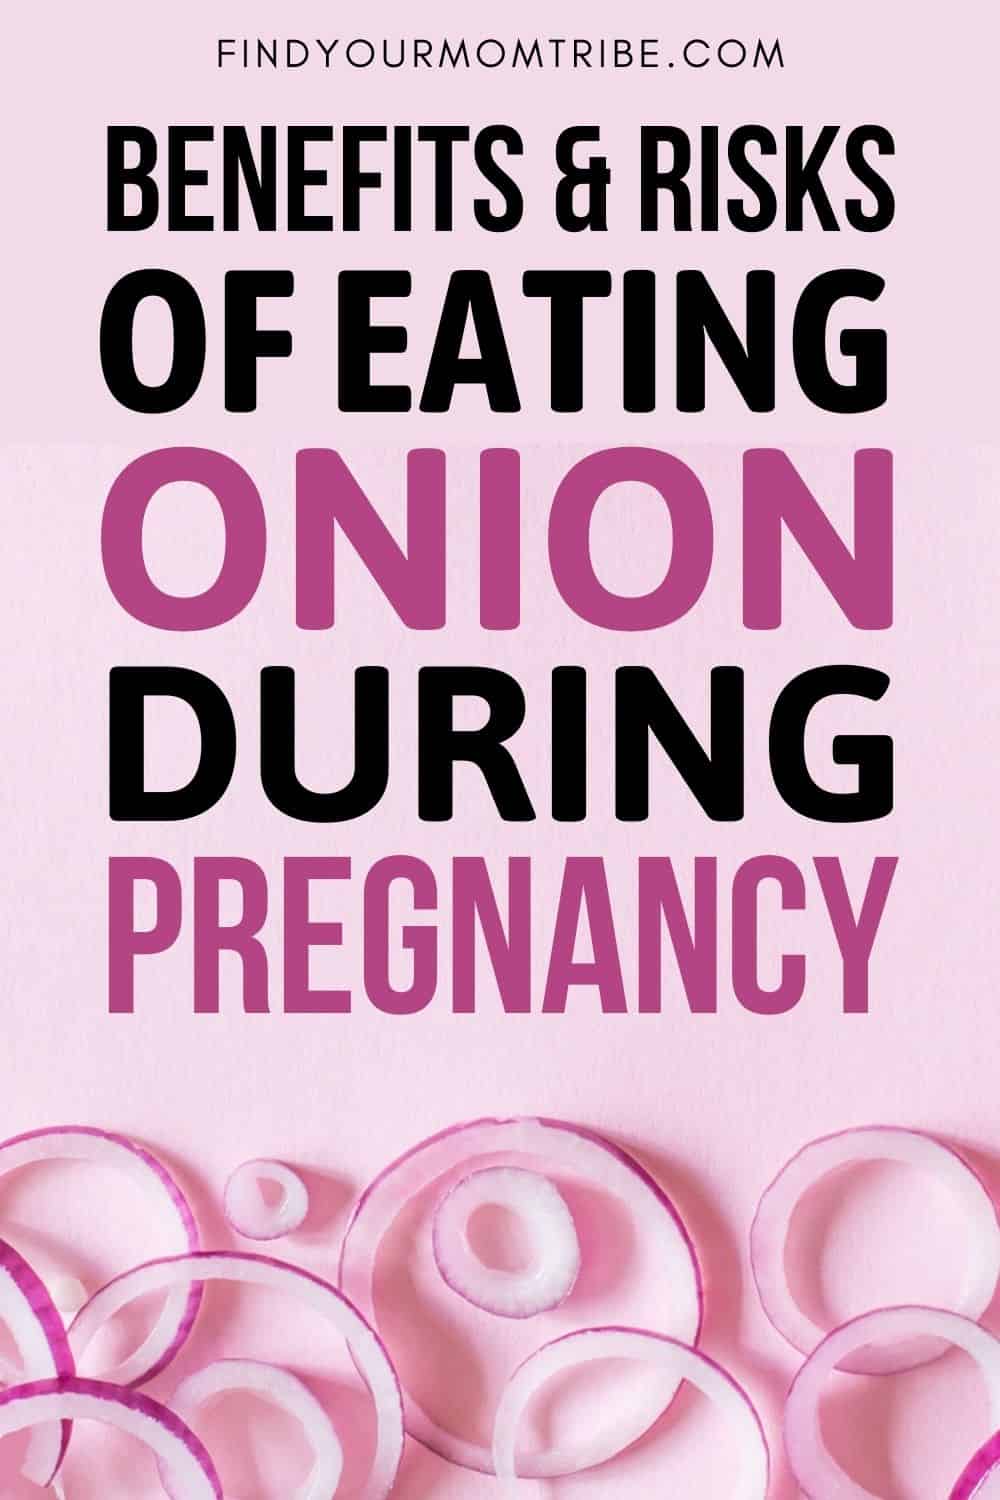 Benefits And Risks Of Eating Onion During Pregnancy Pinterest